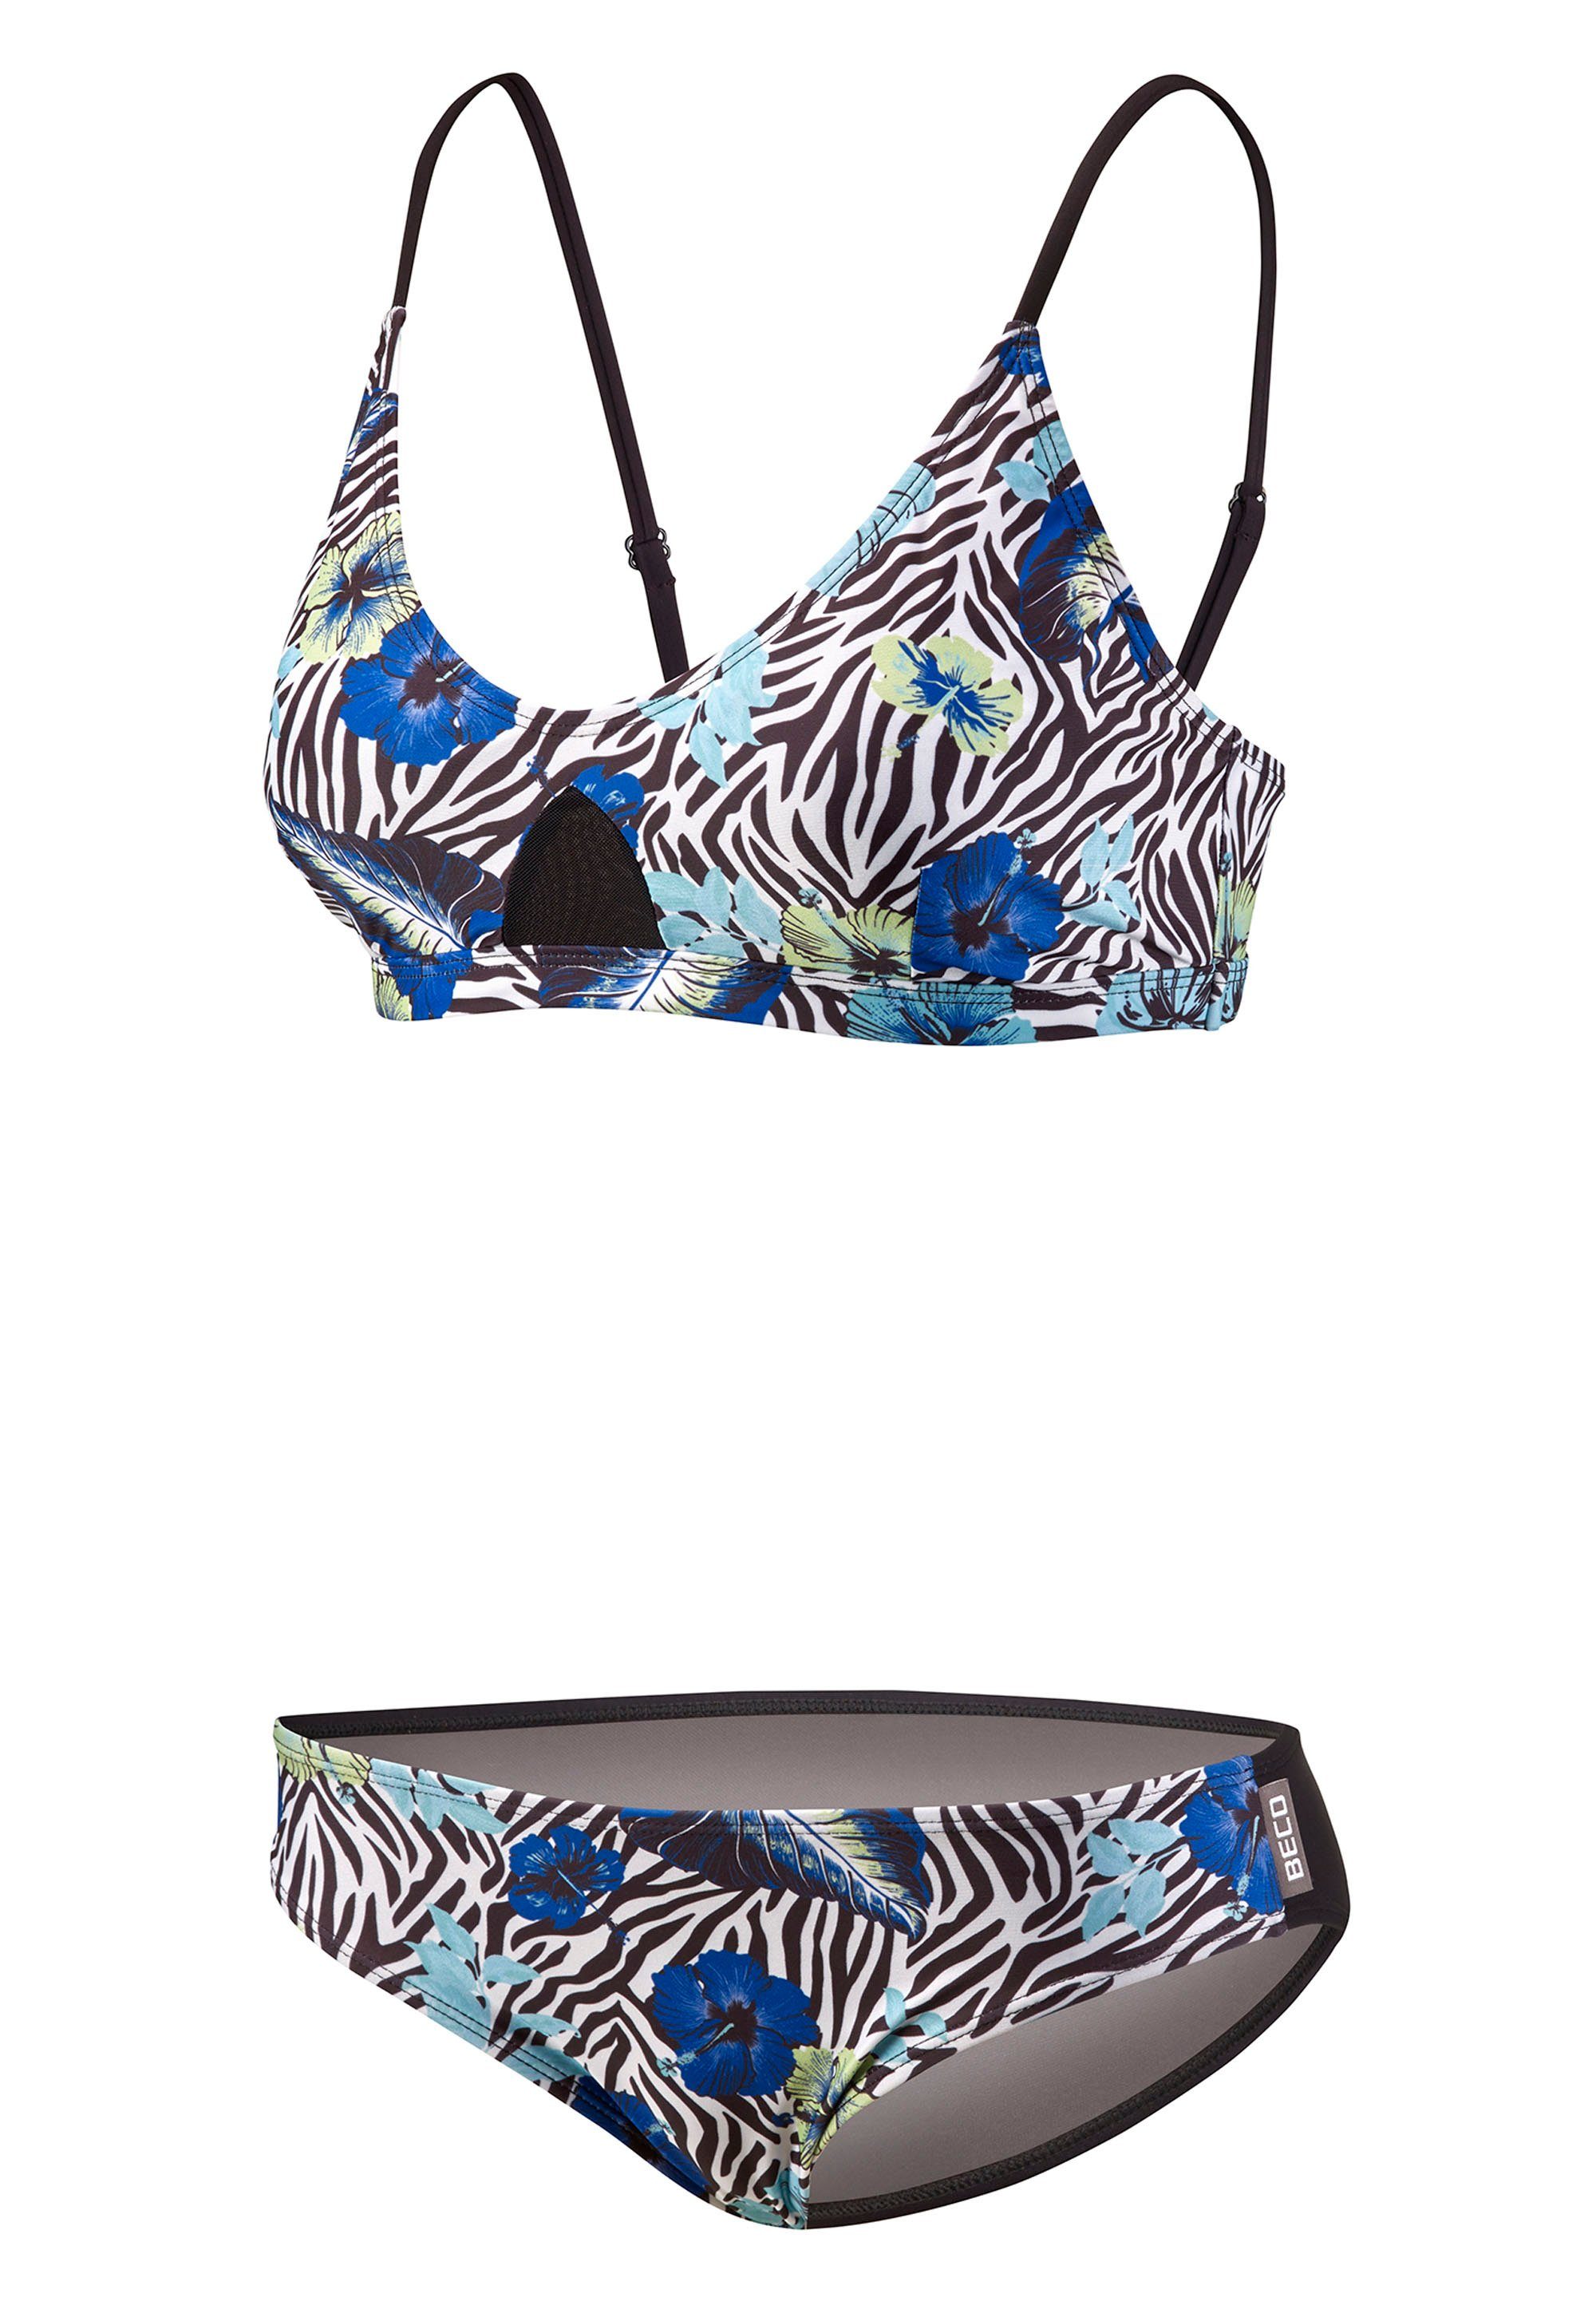 Beco Beermann Balconette-Bikini BECO-Lady-Collection (2-St) in floralem Design